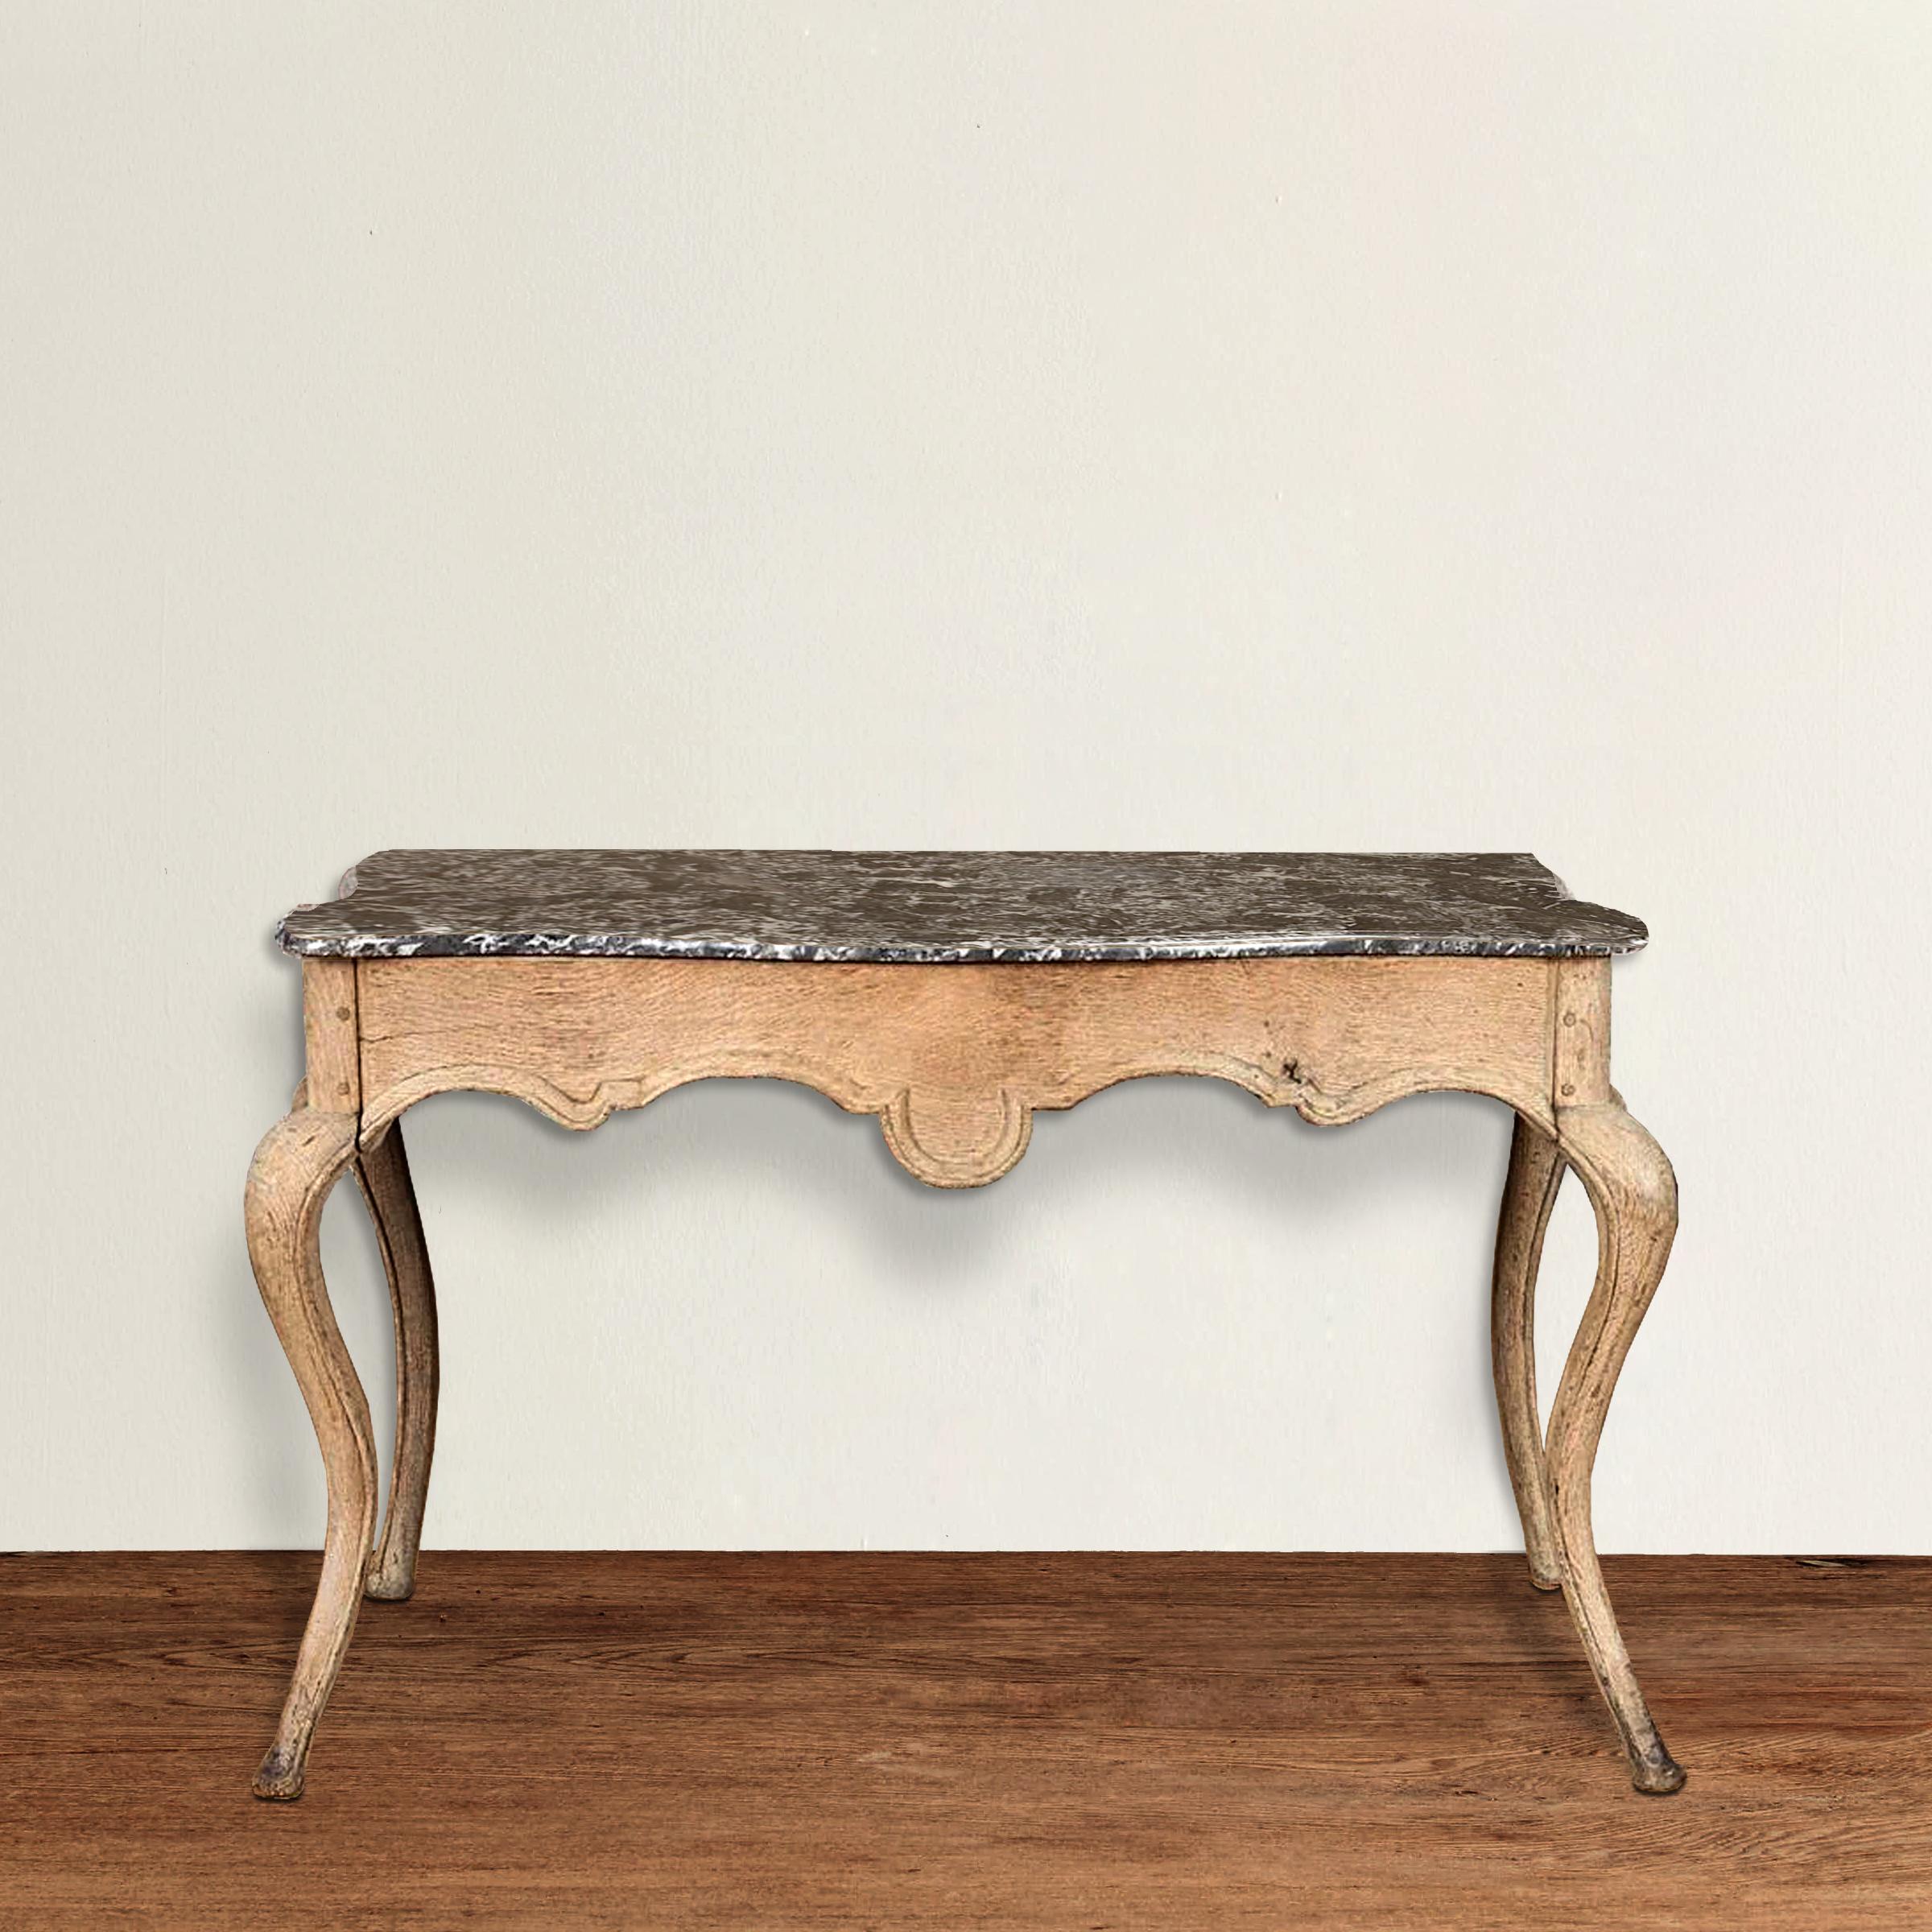 An incredible ornamental yet not ostentatious 19th century French Louis XVI-style unfinished oak console table with a scalloped apron, exaggerated and sexy tapered cabriole legs, and an active black and white marble top with an ogee edge. Très chic!